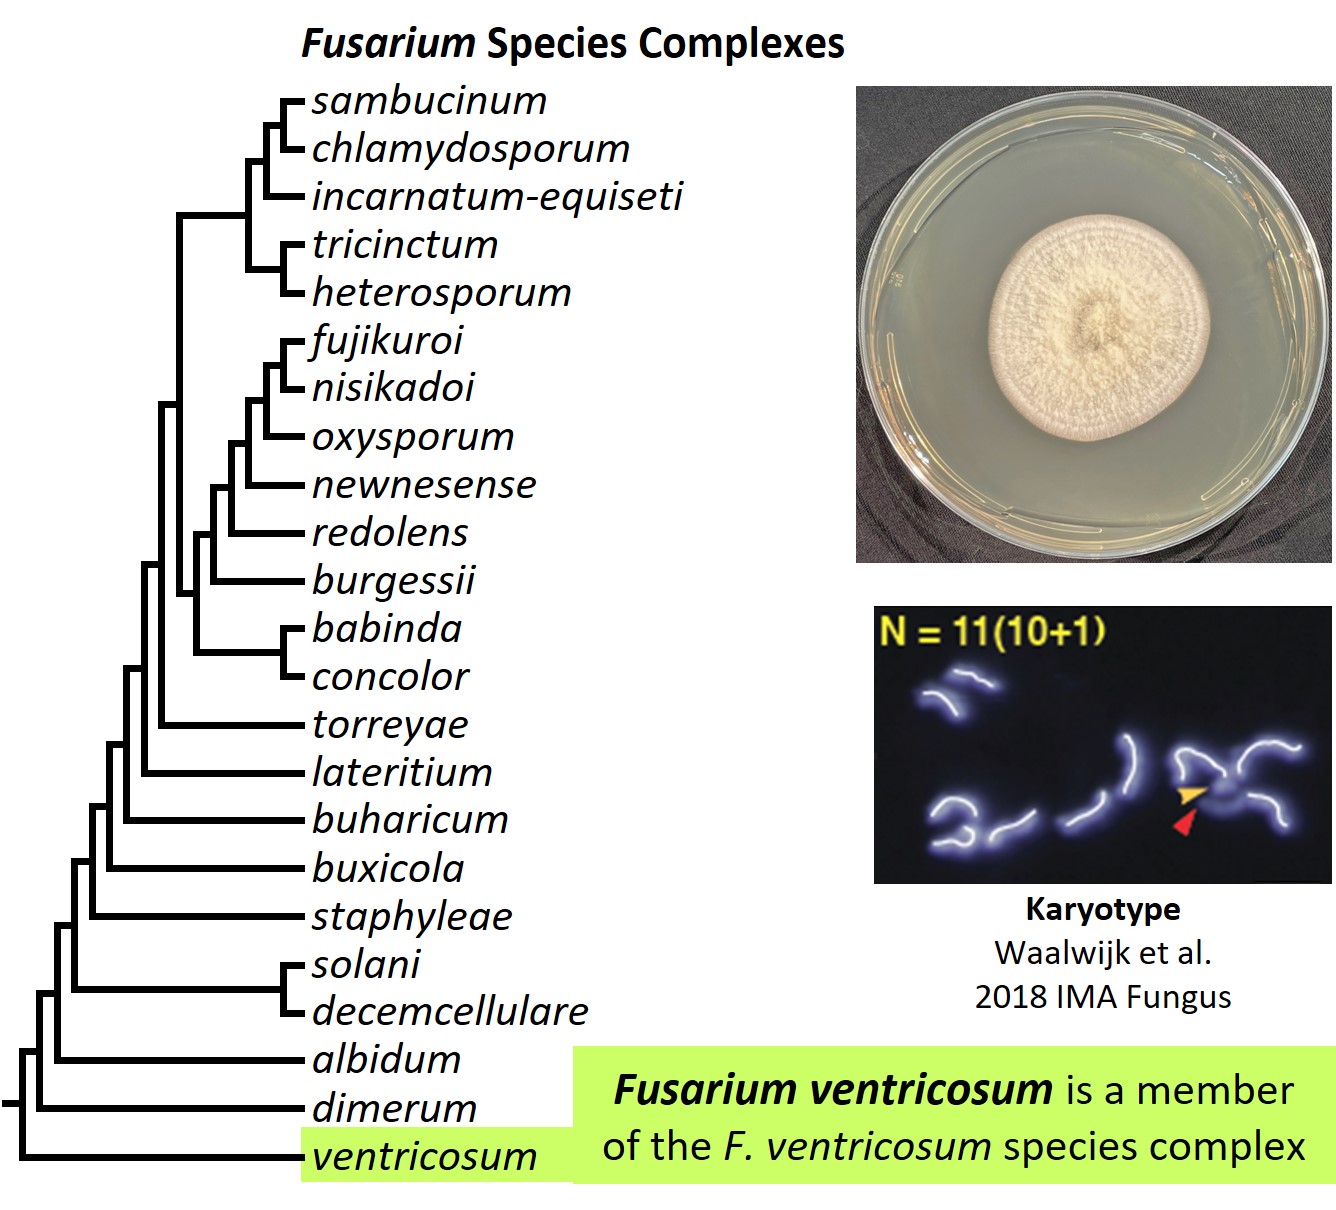 Left &ndash; tree showing phylogenetic relationships of the 23
Fusarium species complexes and placement of F. ventricosum within
the F. ventricosum species complex. In the tree, species complex
names are abbreviated using specific epithets of the species after
which the complexes are named (e.g., the F. sambucinum species
complex is abbreviated as sambucinum). Upper right &ndash; culture
of F. ventricosum NRRL 25729 growing on potato dextrose agar
medium. Lower right &ndash; karyotype of F. ventricosum NRRL 25729.
Image credit: Robert H. Proctor, Amy McGovern and Crystal Probyn.